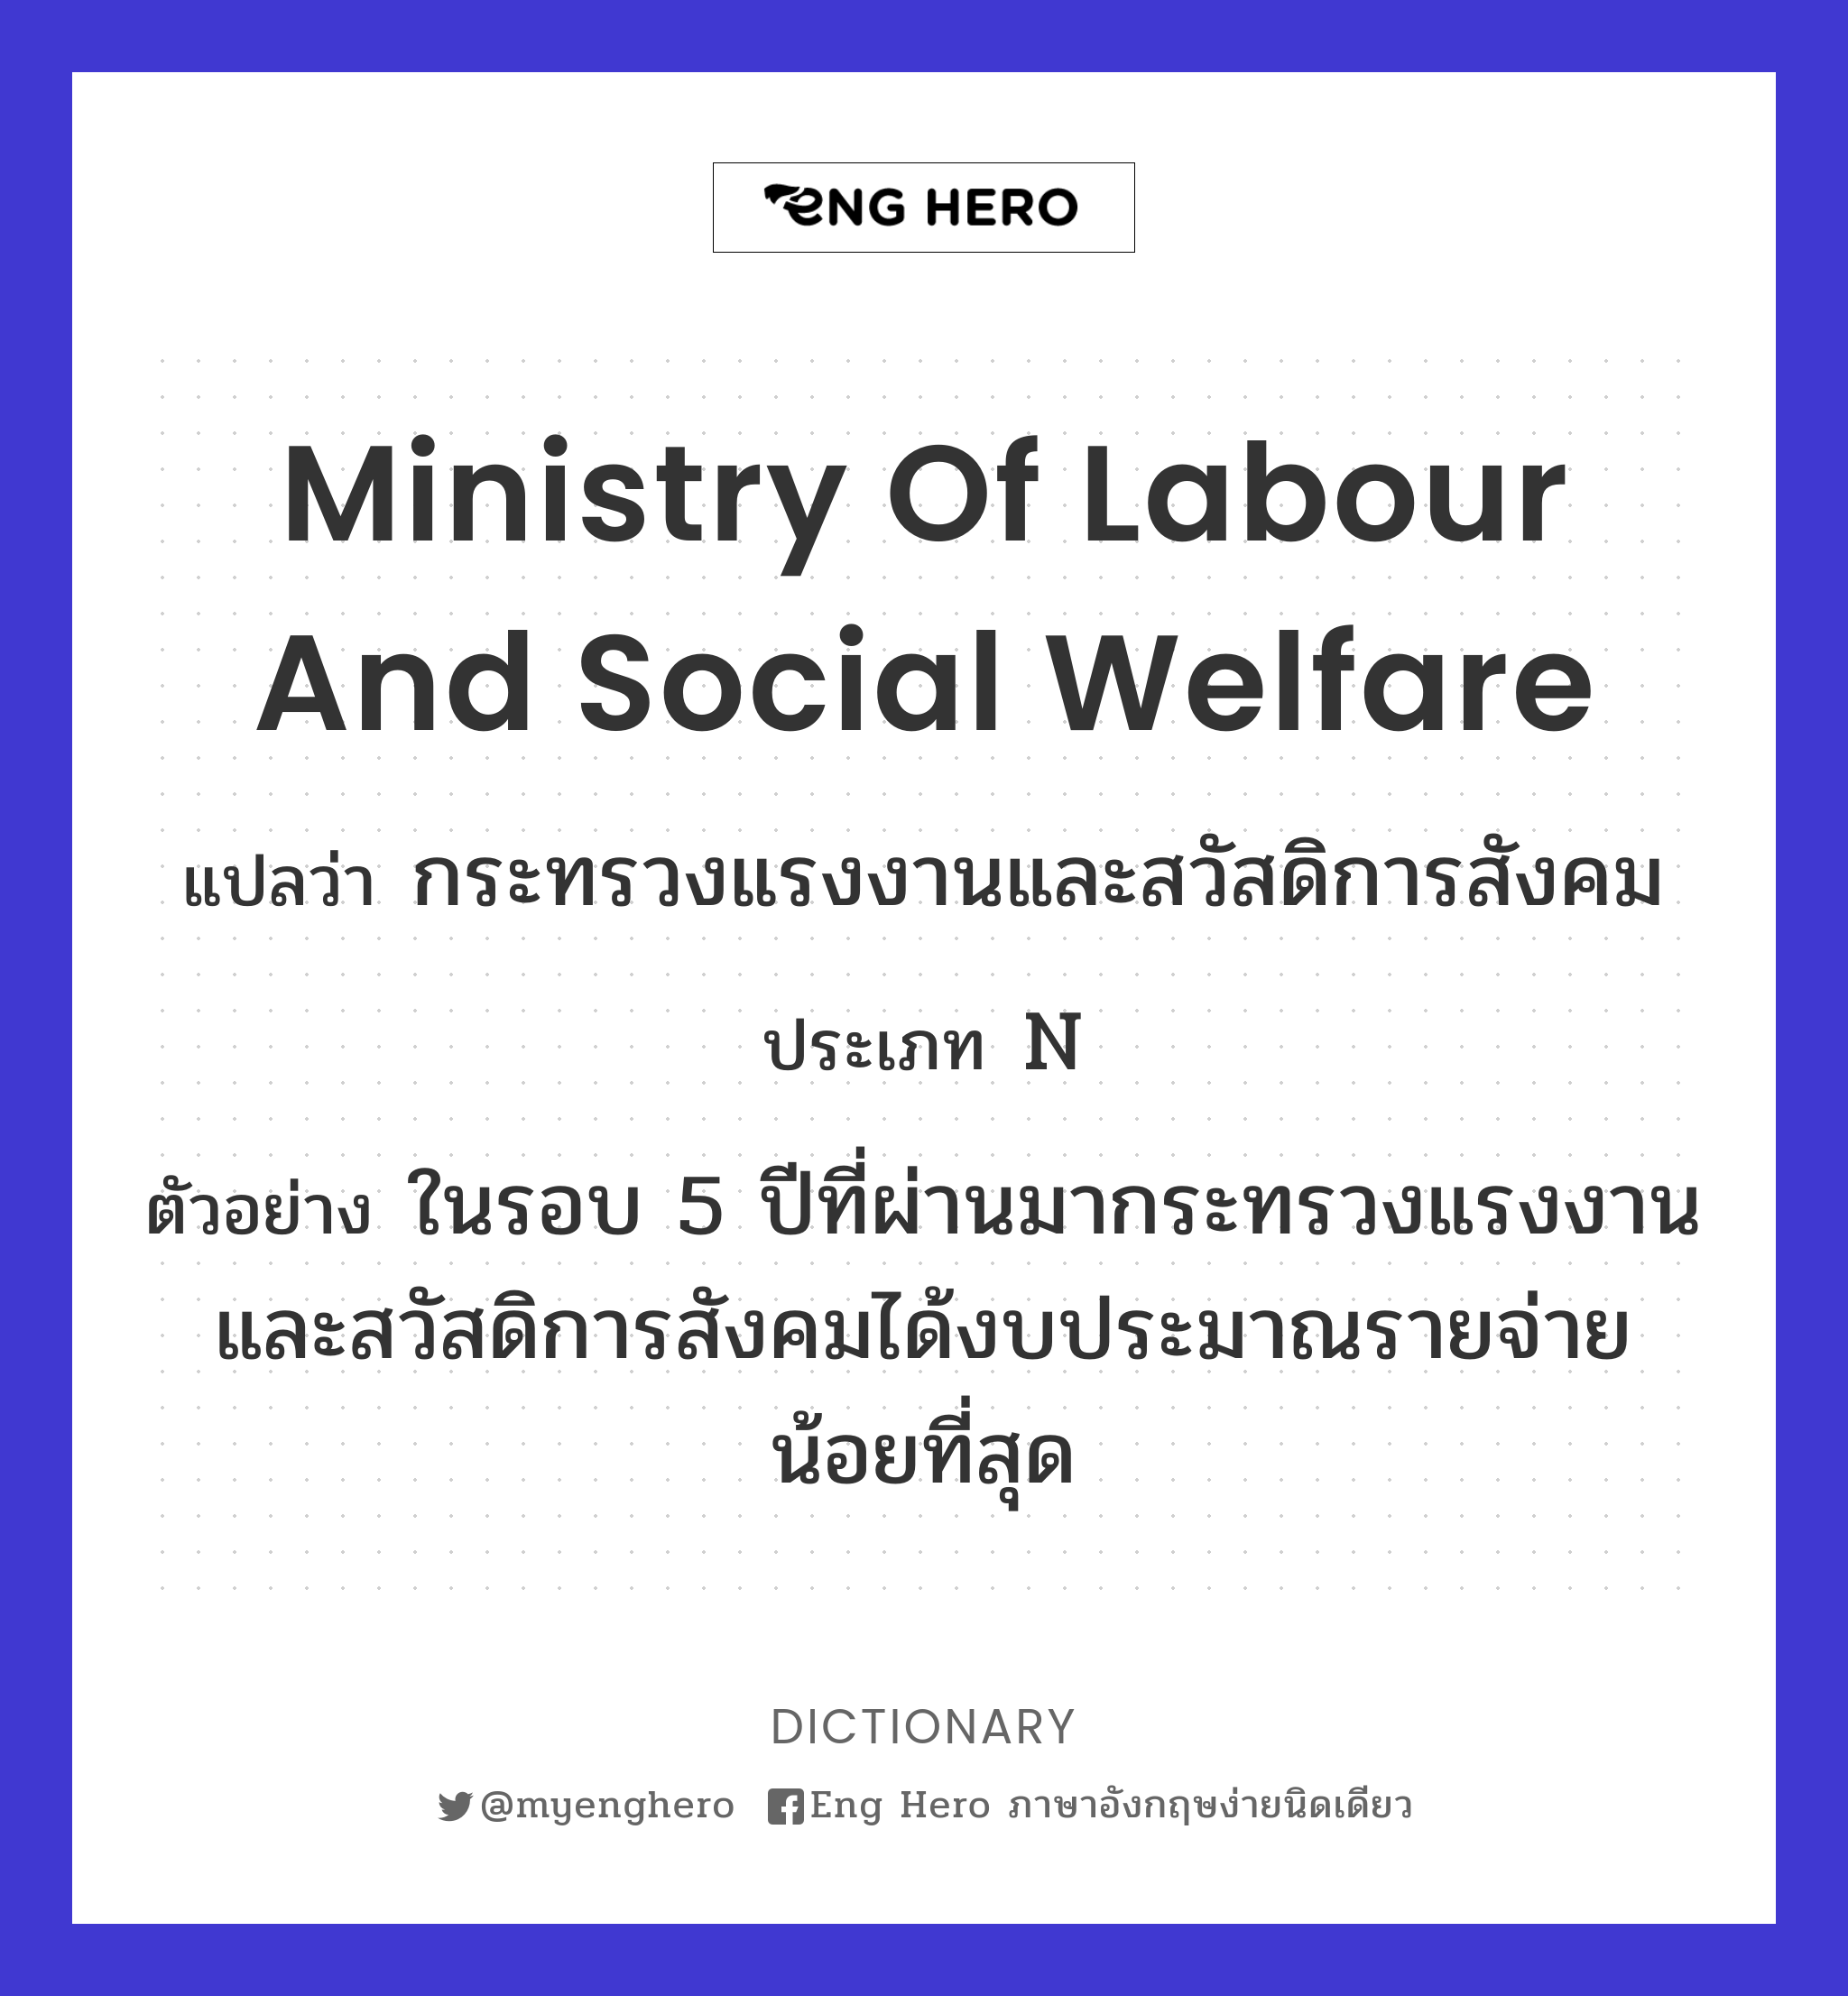 Ministry of Labour and Social Welfare